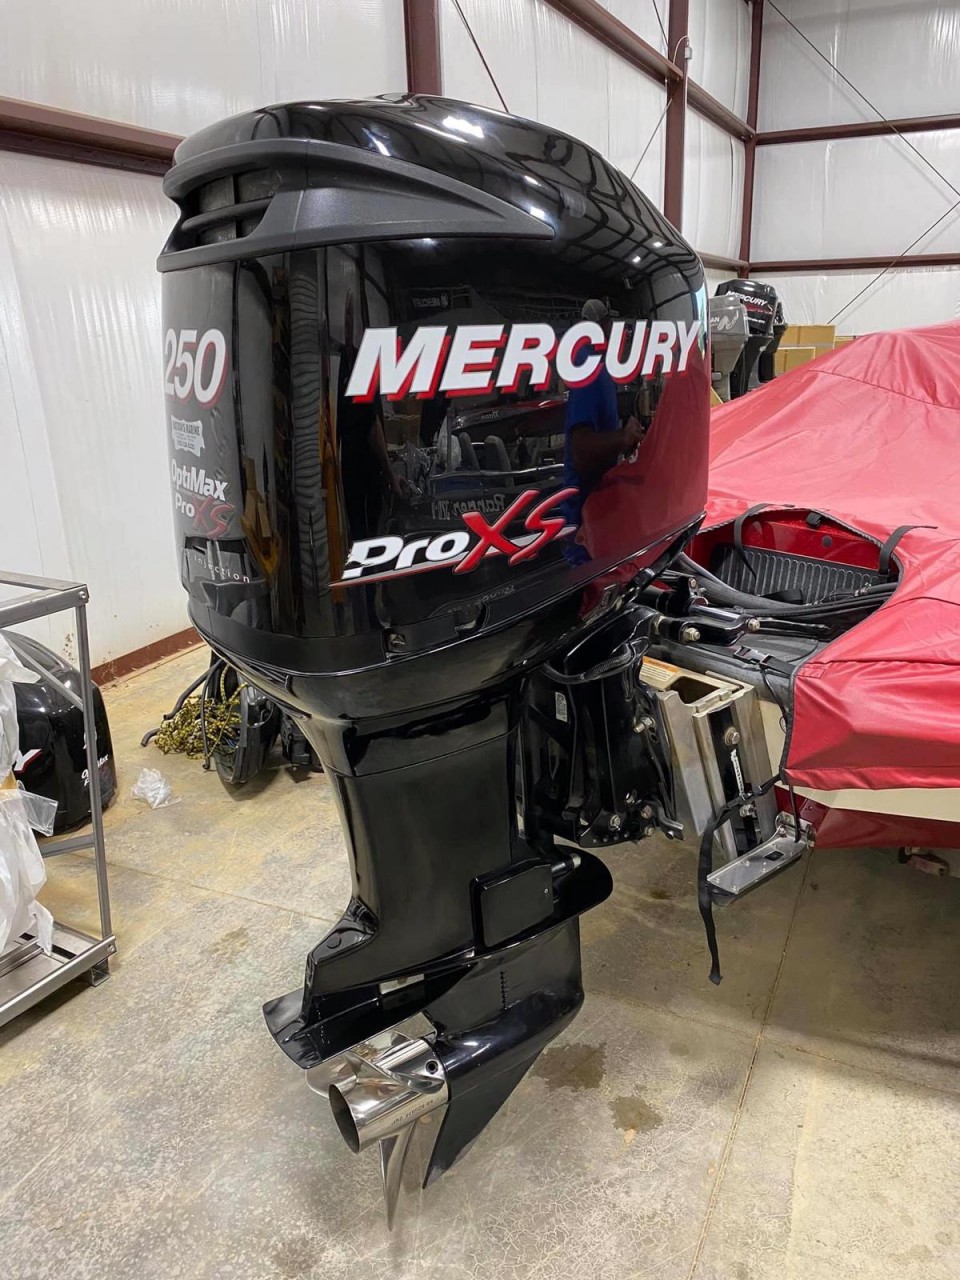 Used 2008 Mercury Optimax 250 Pro Xs Outboard Motor For Sale Sport